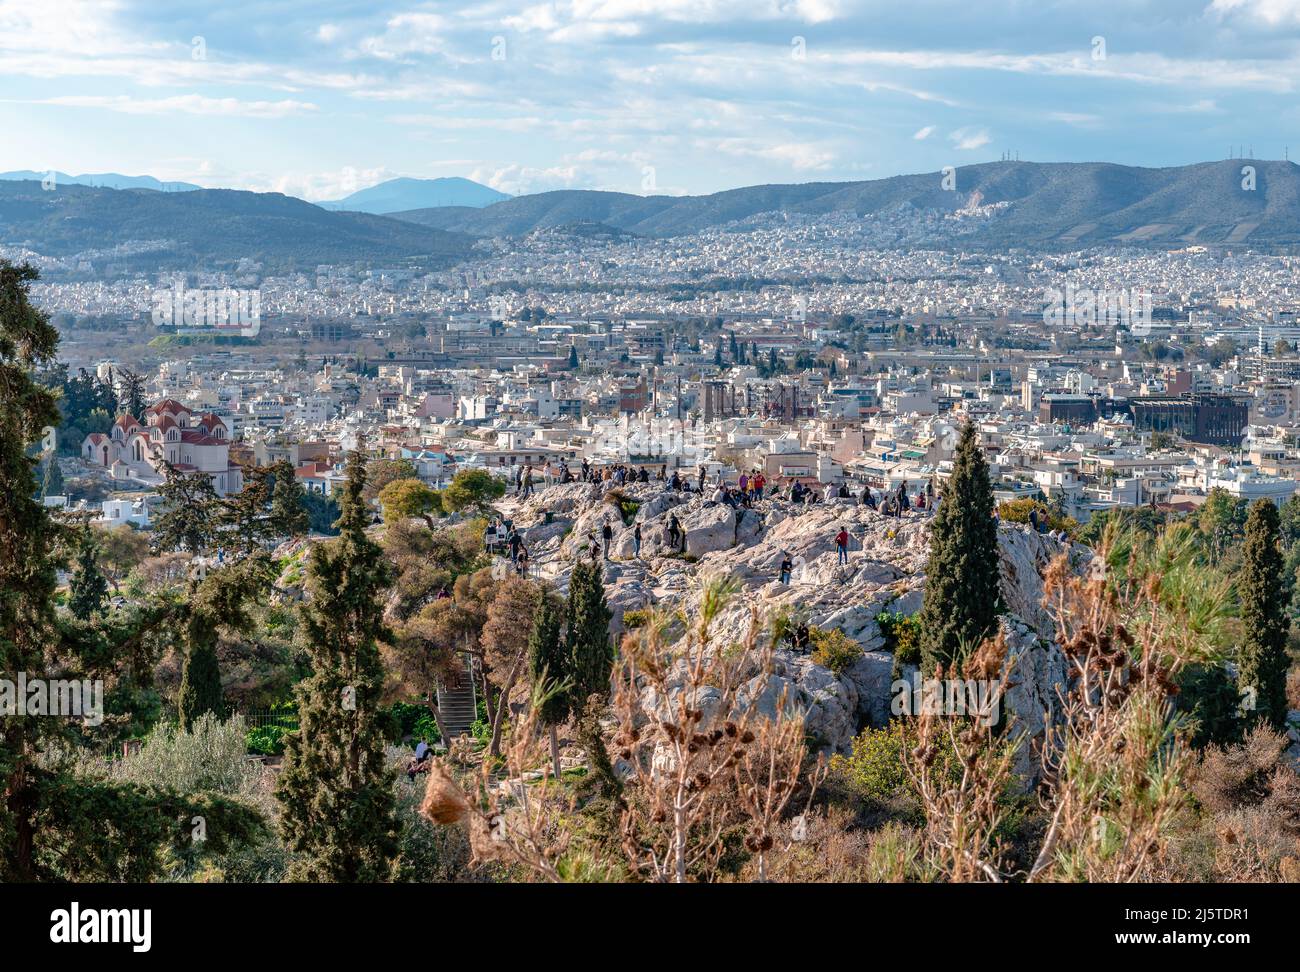 Athens, Greece - March 6 2022: Incidental people on the Areopagus Hill enjoy the skyline of Athens. Photo taken from the Acropolis Hill. Stock Photo